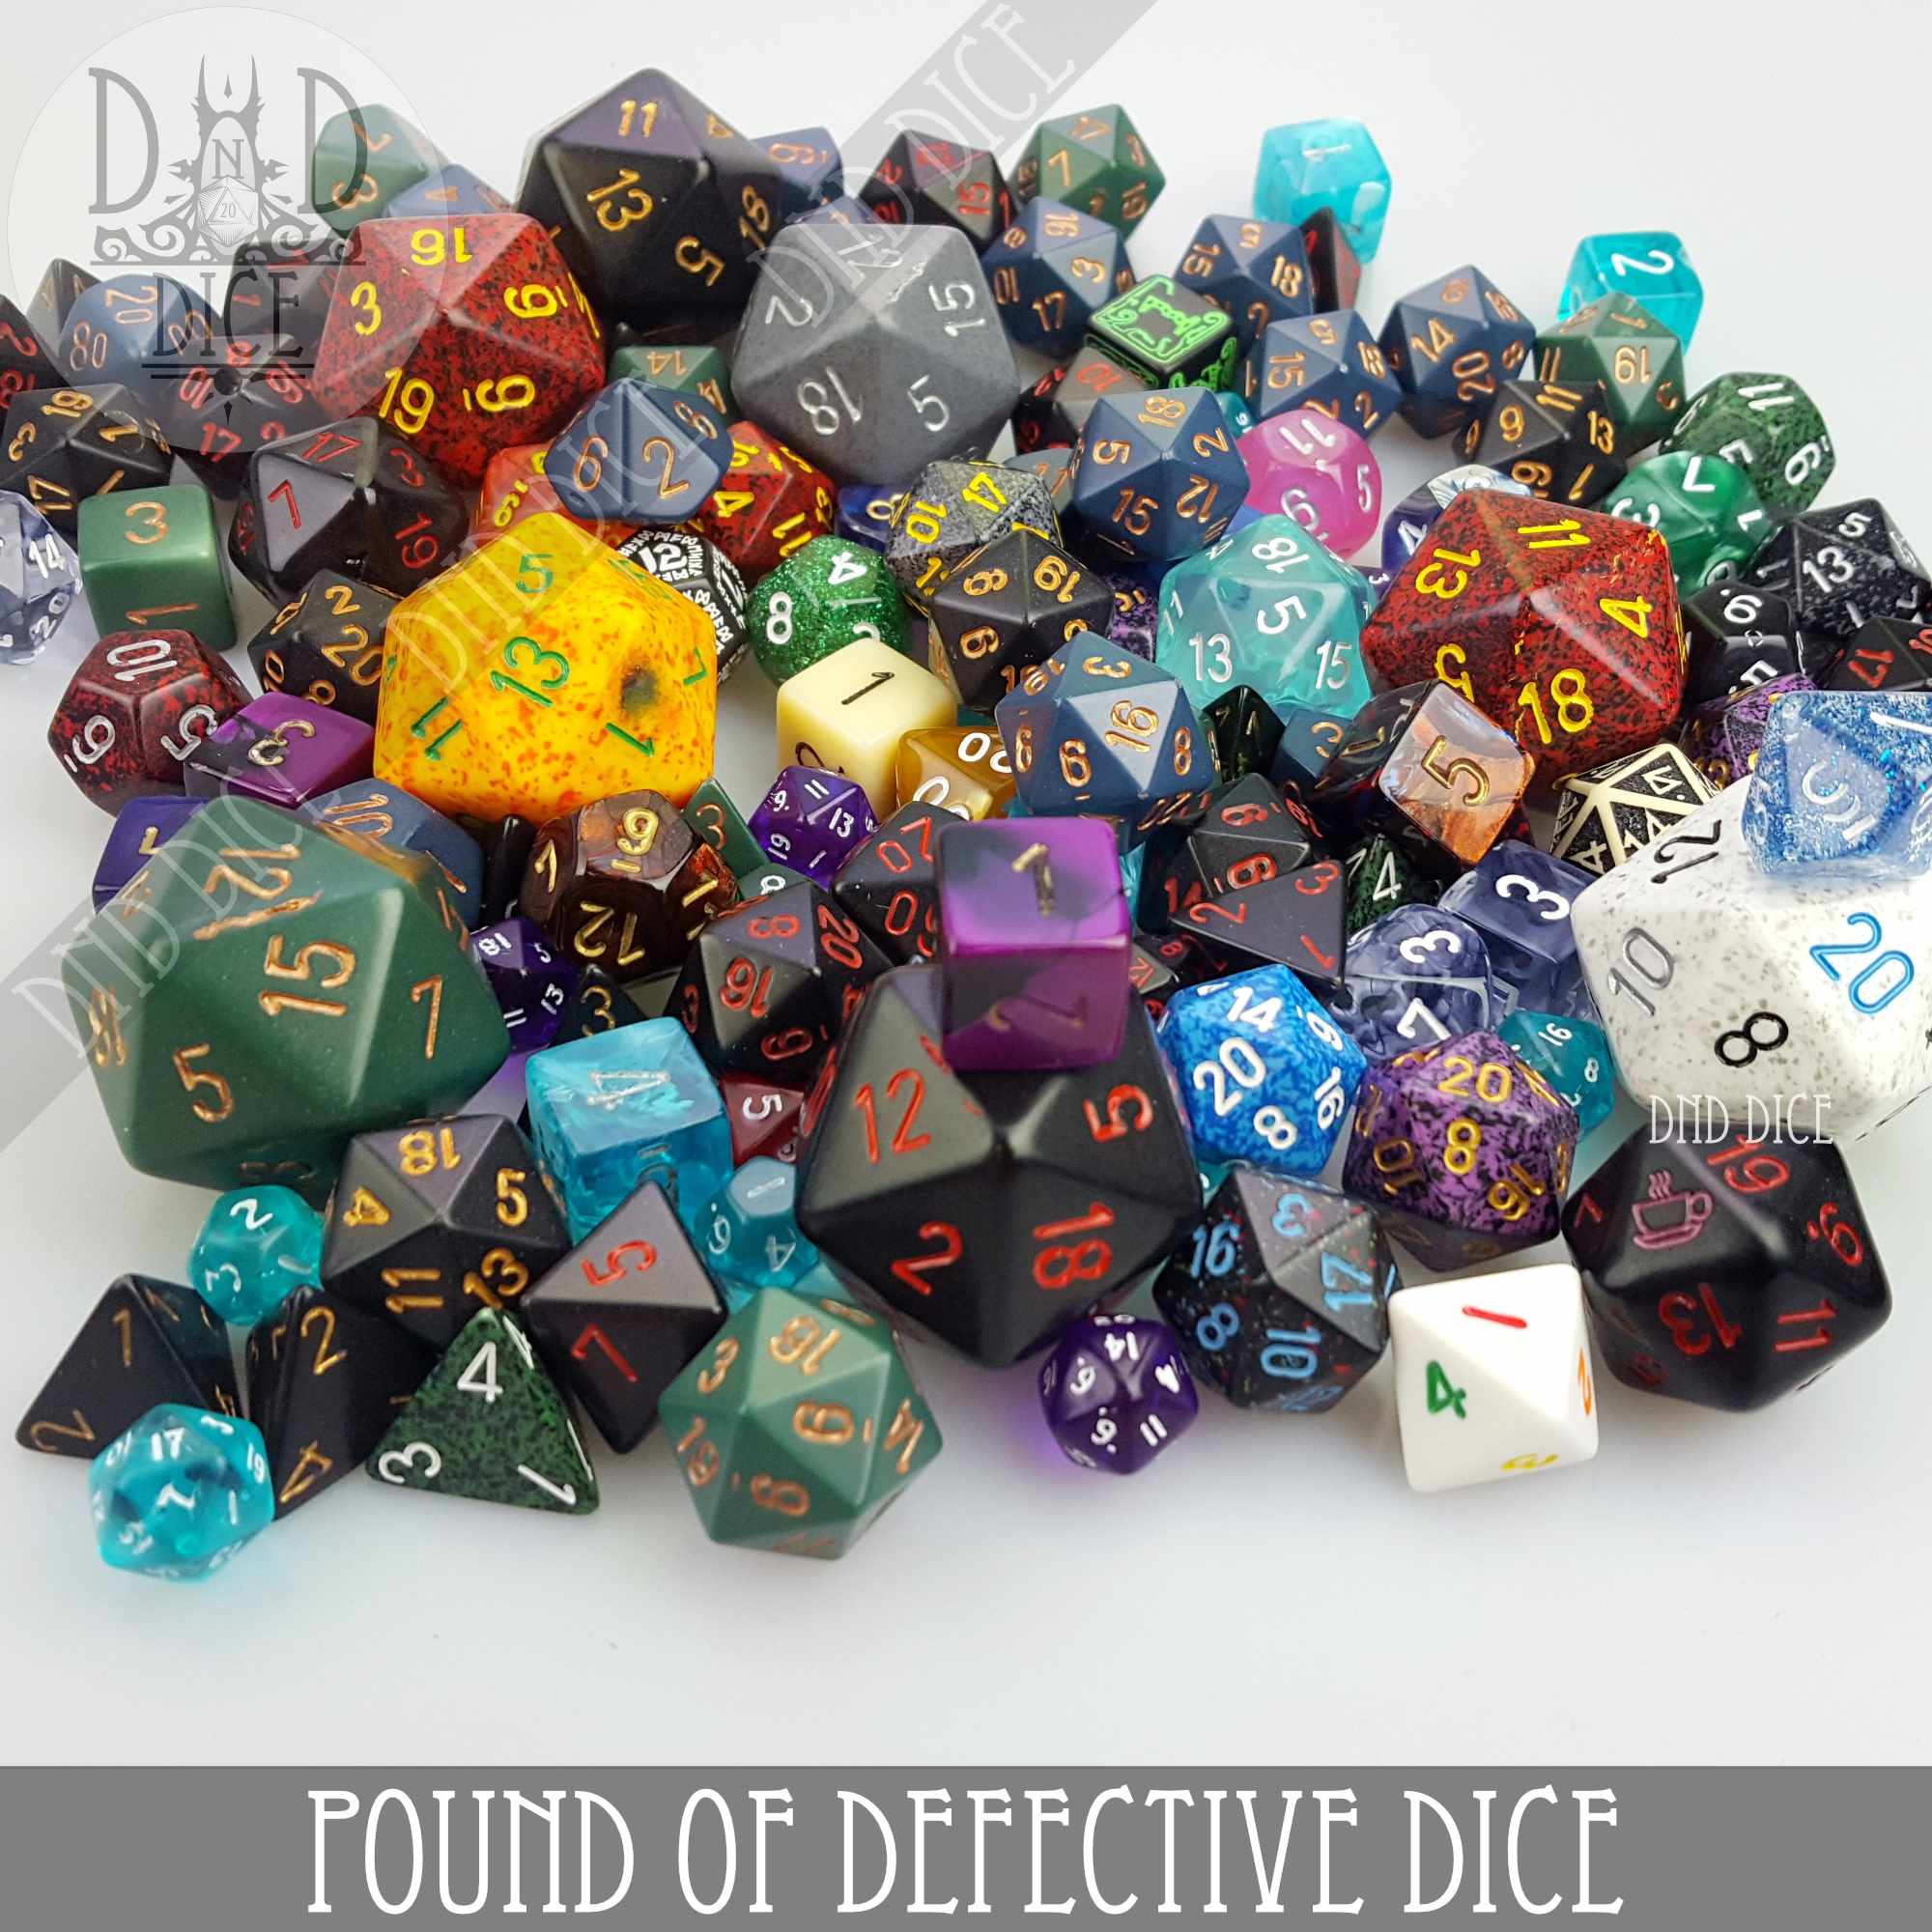 DND DICE, Huge Selection of Role Playing Dice, D&D Dice Shop